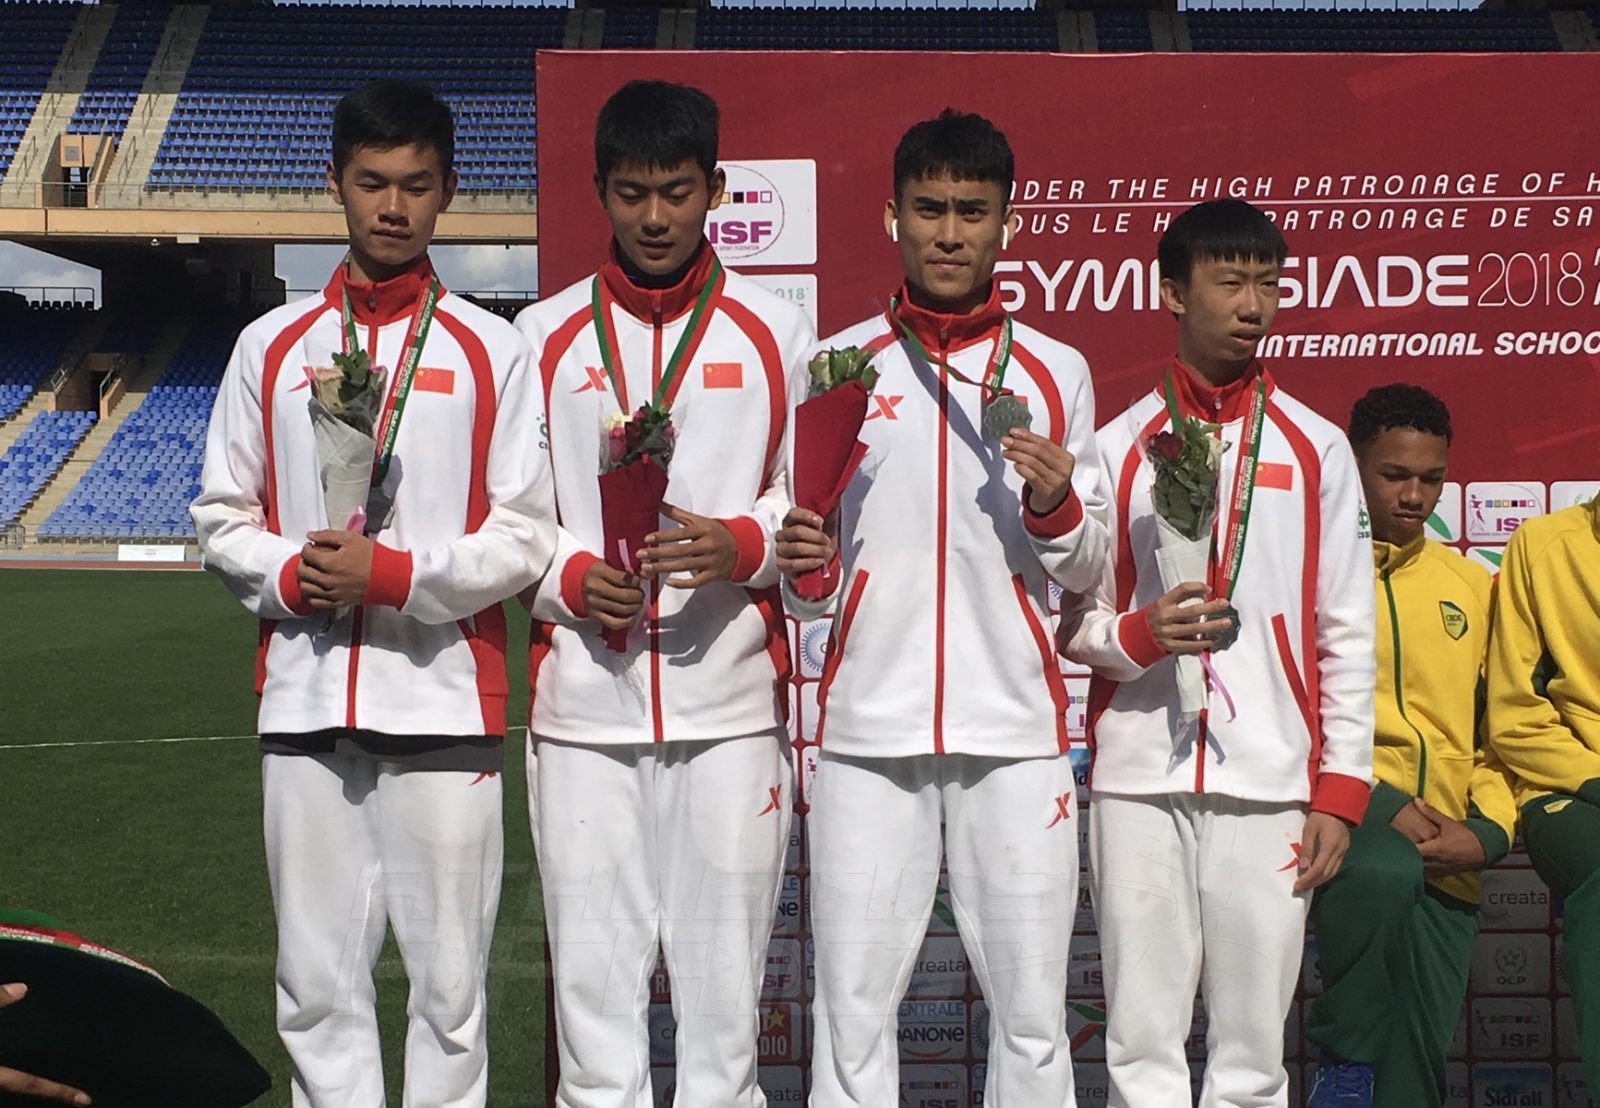 The Chinese quartet after the Boys 4x100m relays medal presentation at Gymnasiade 2018 in Marrakech / Photo Credit: Yomi Omogbeja